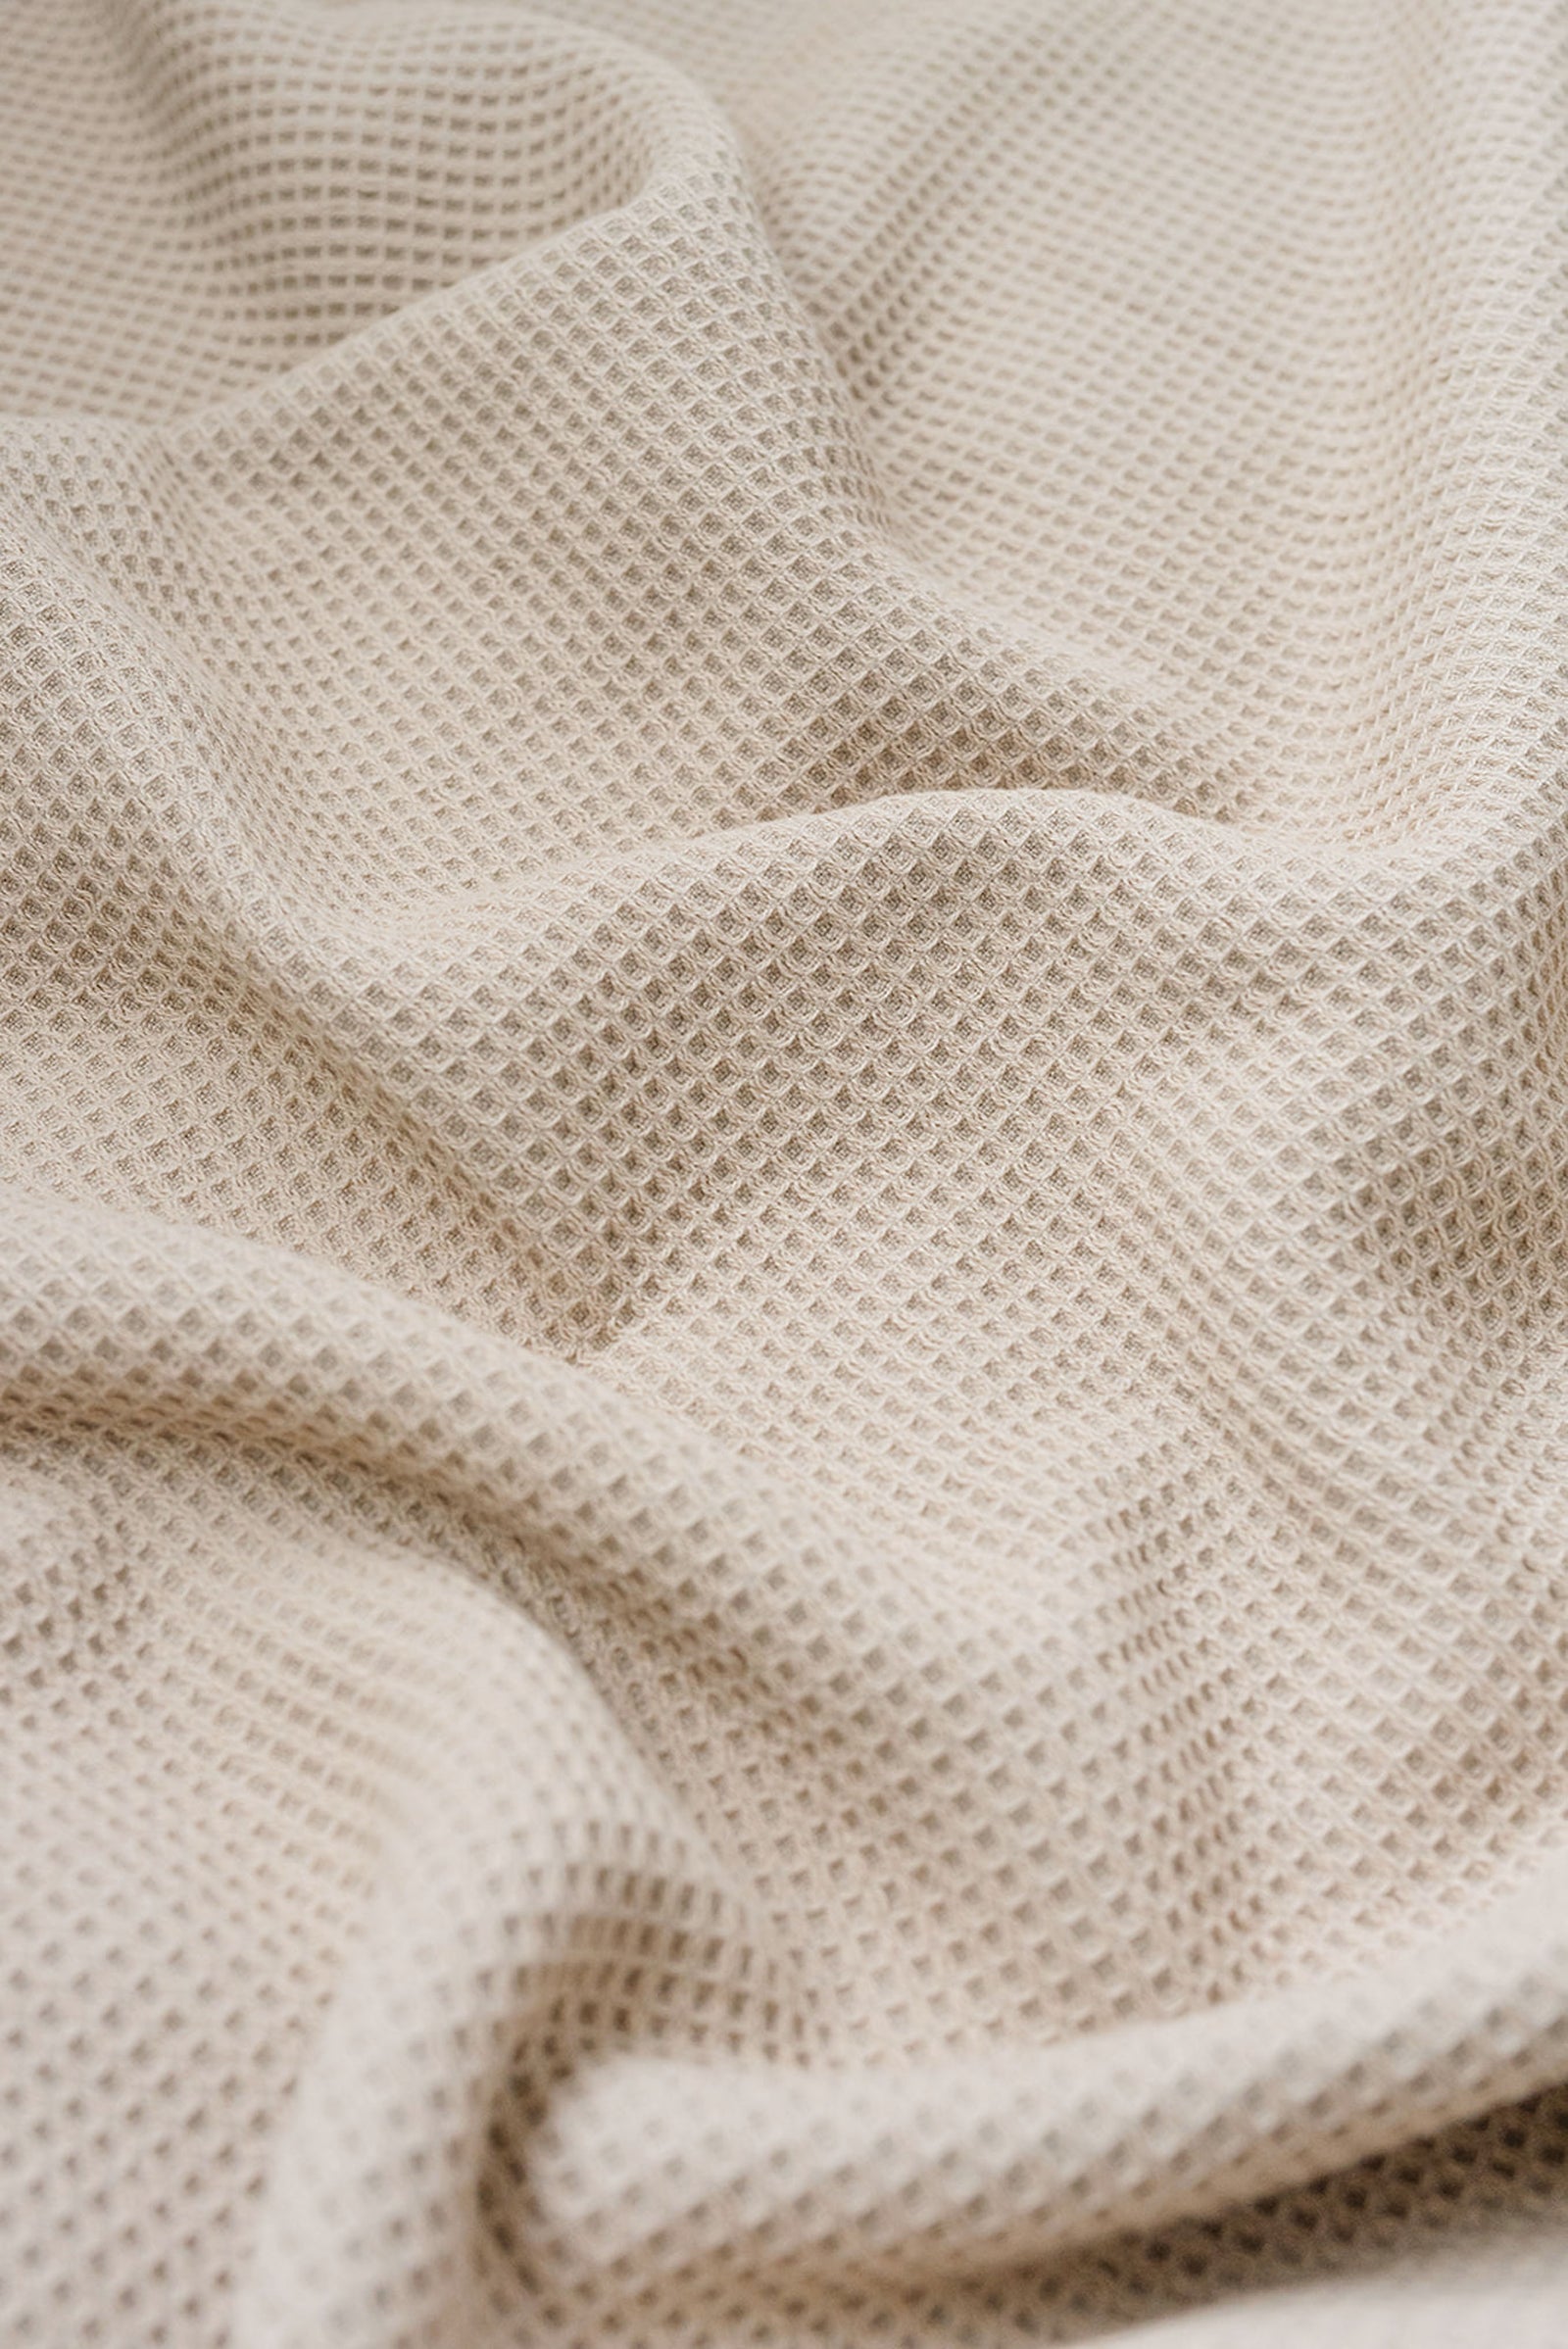 Waffle Bath Towel in the color Sand. Photo of Sand Waffle Bath Towel taken close up only showing the towel 